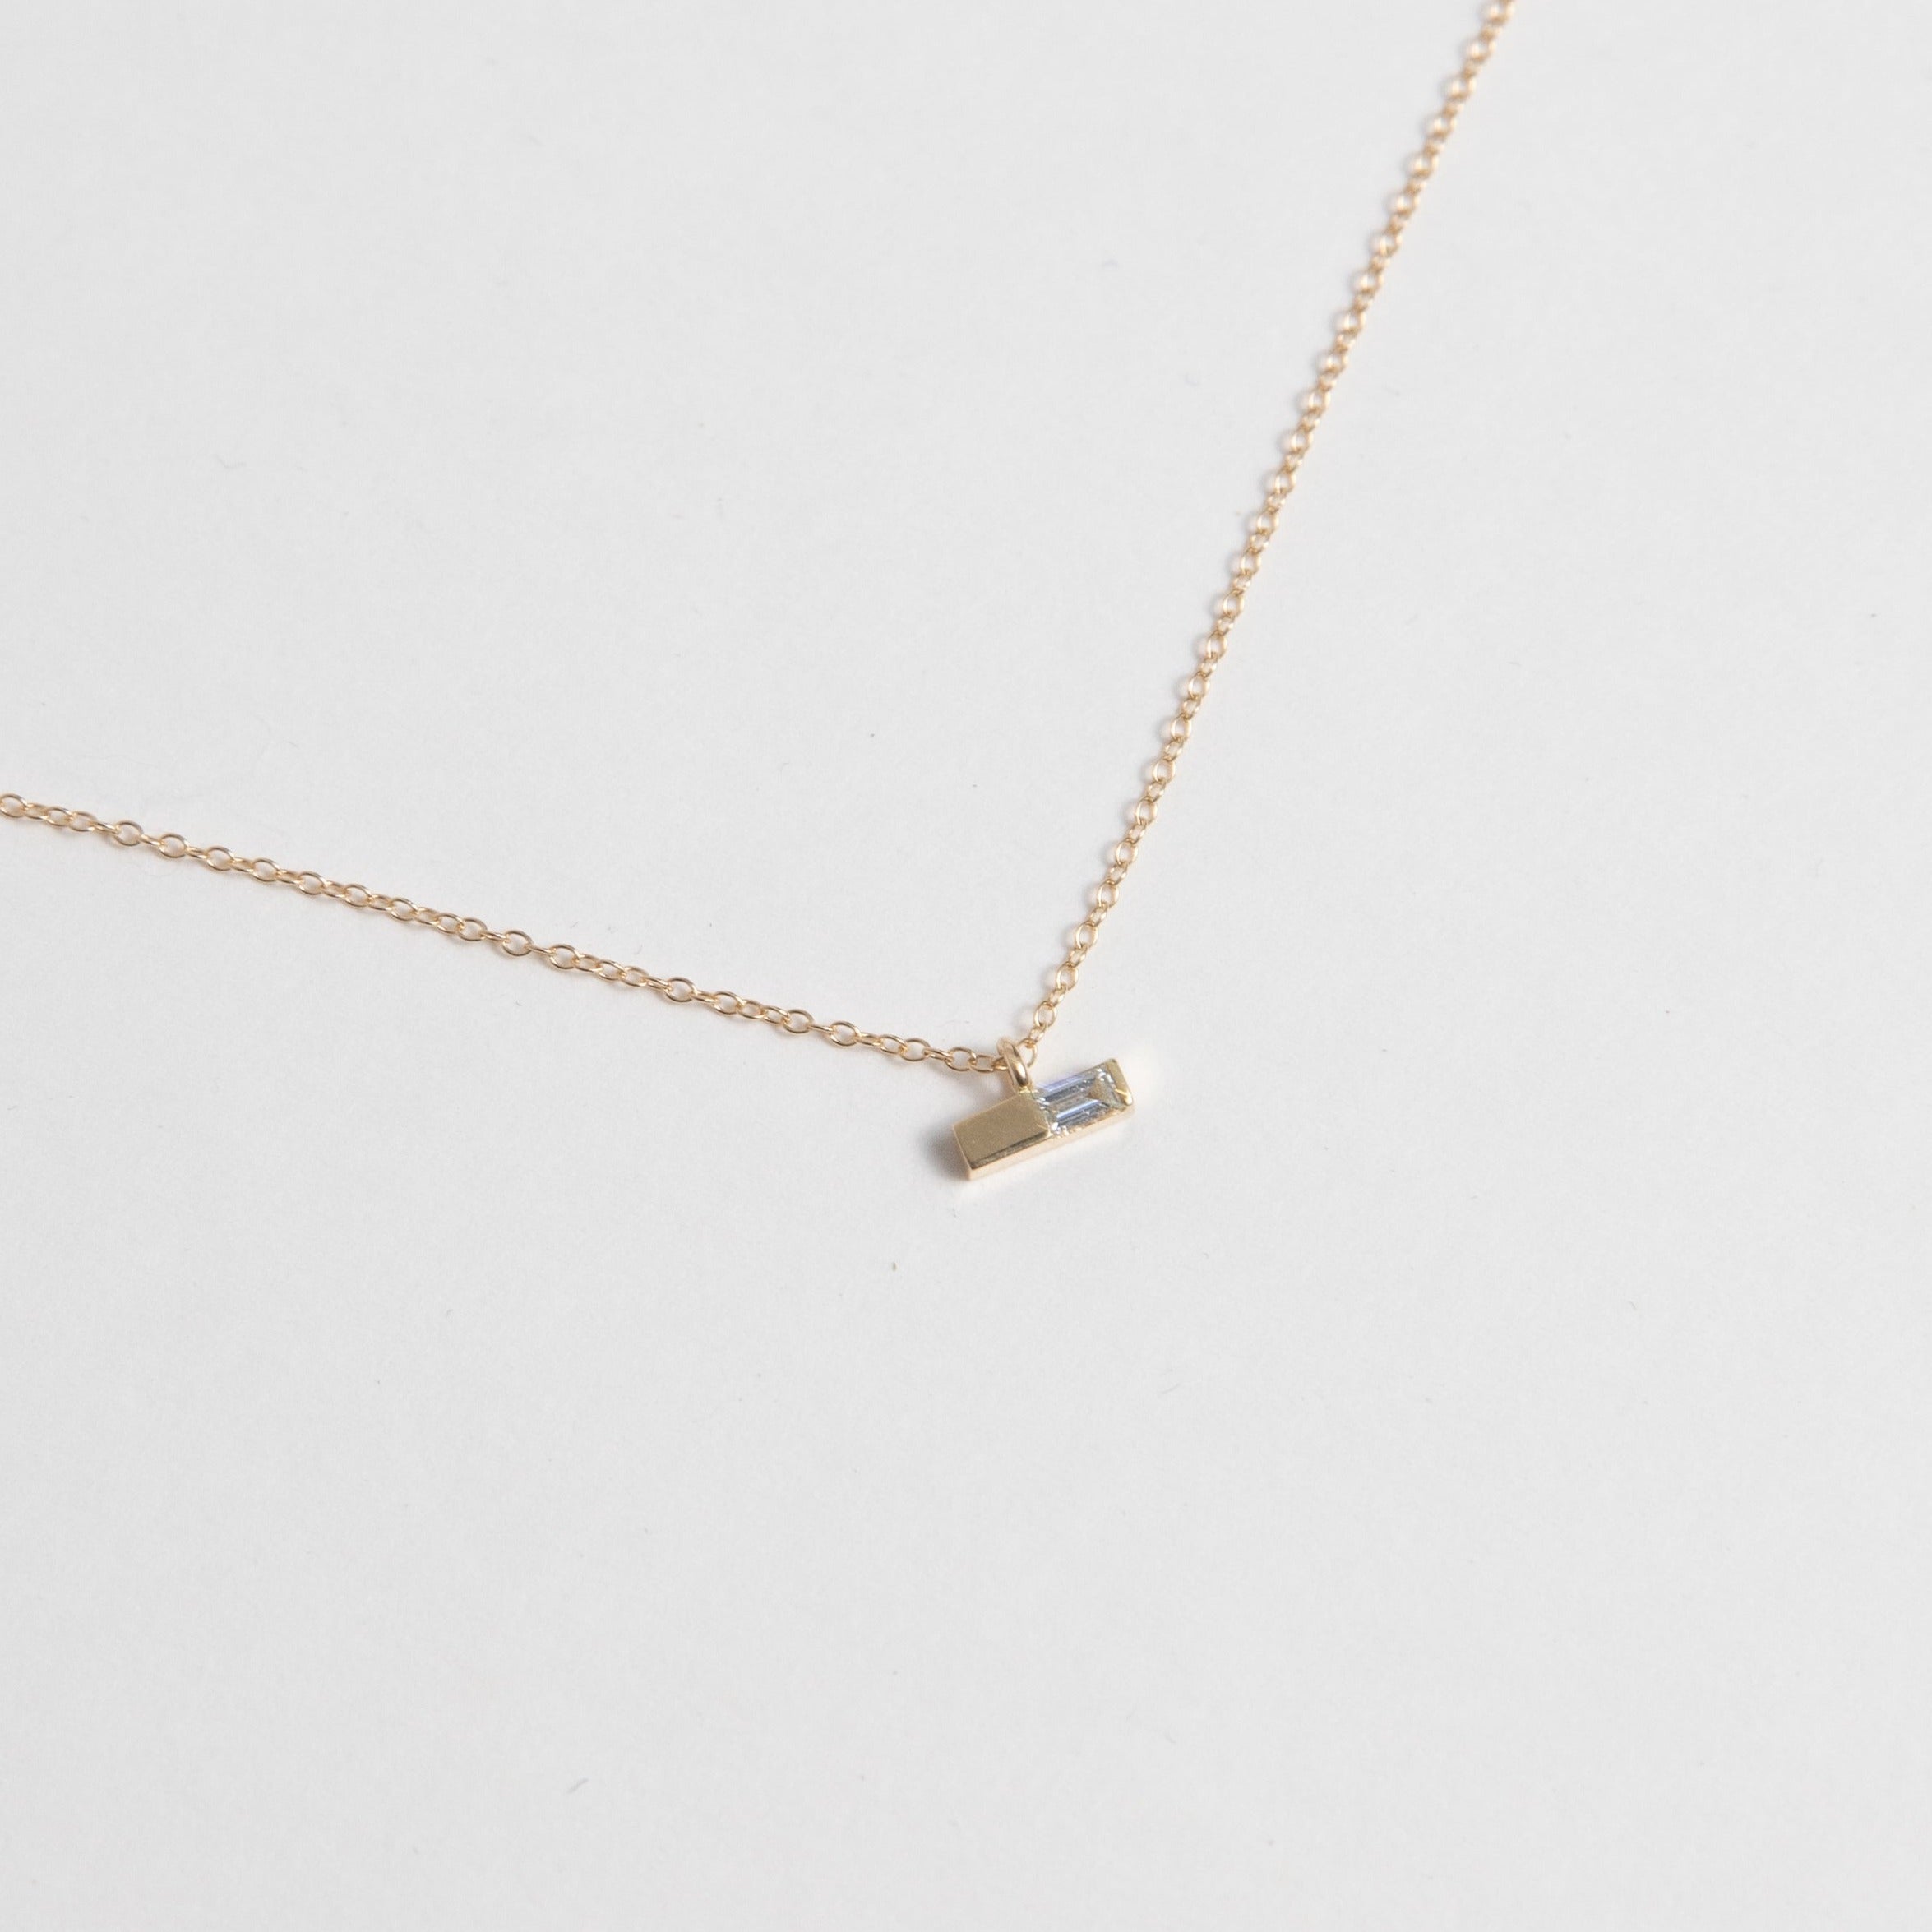 Gera Unique Necklace in 14k Gold set with Baguette Cut Diamond By SHW Fine Jewelry NYC